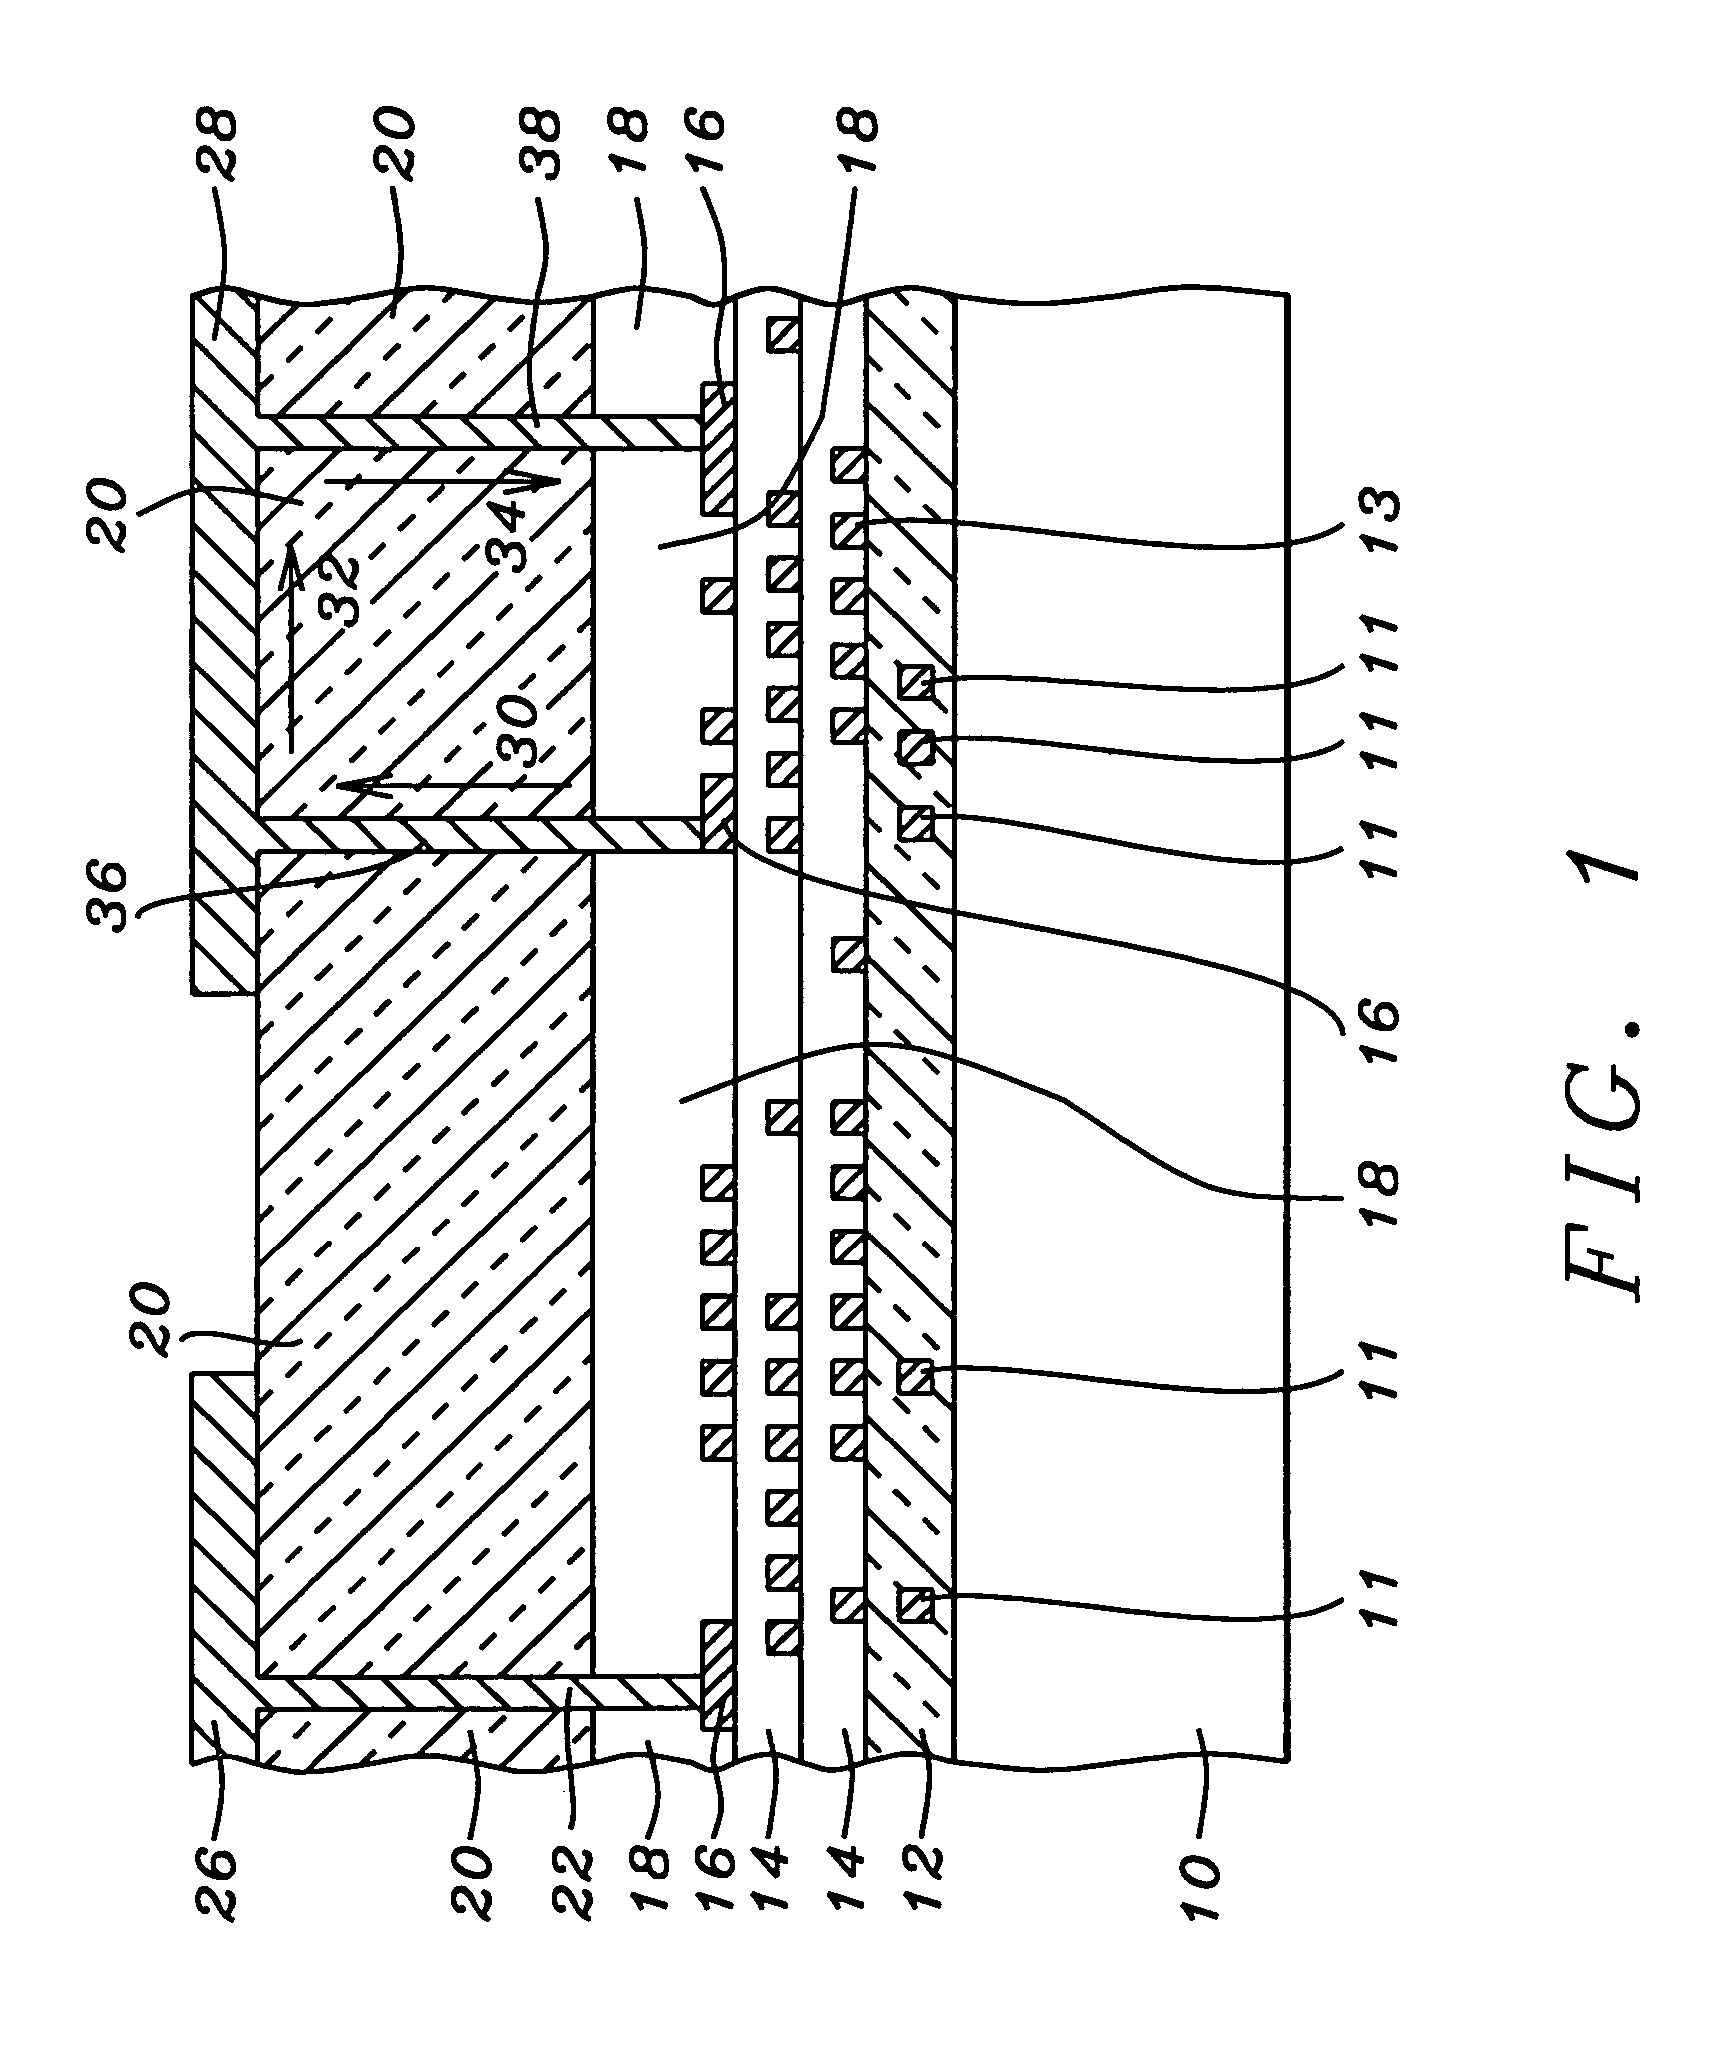 Post passivation interconnection process and structures